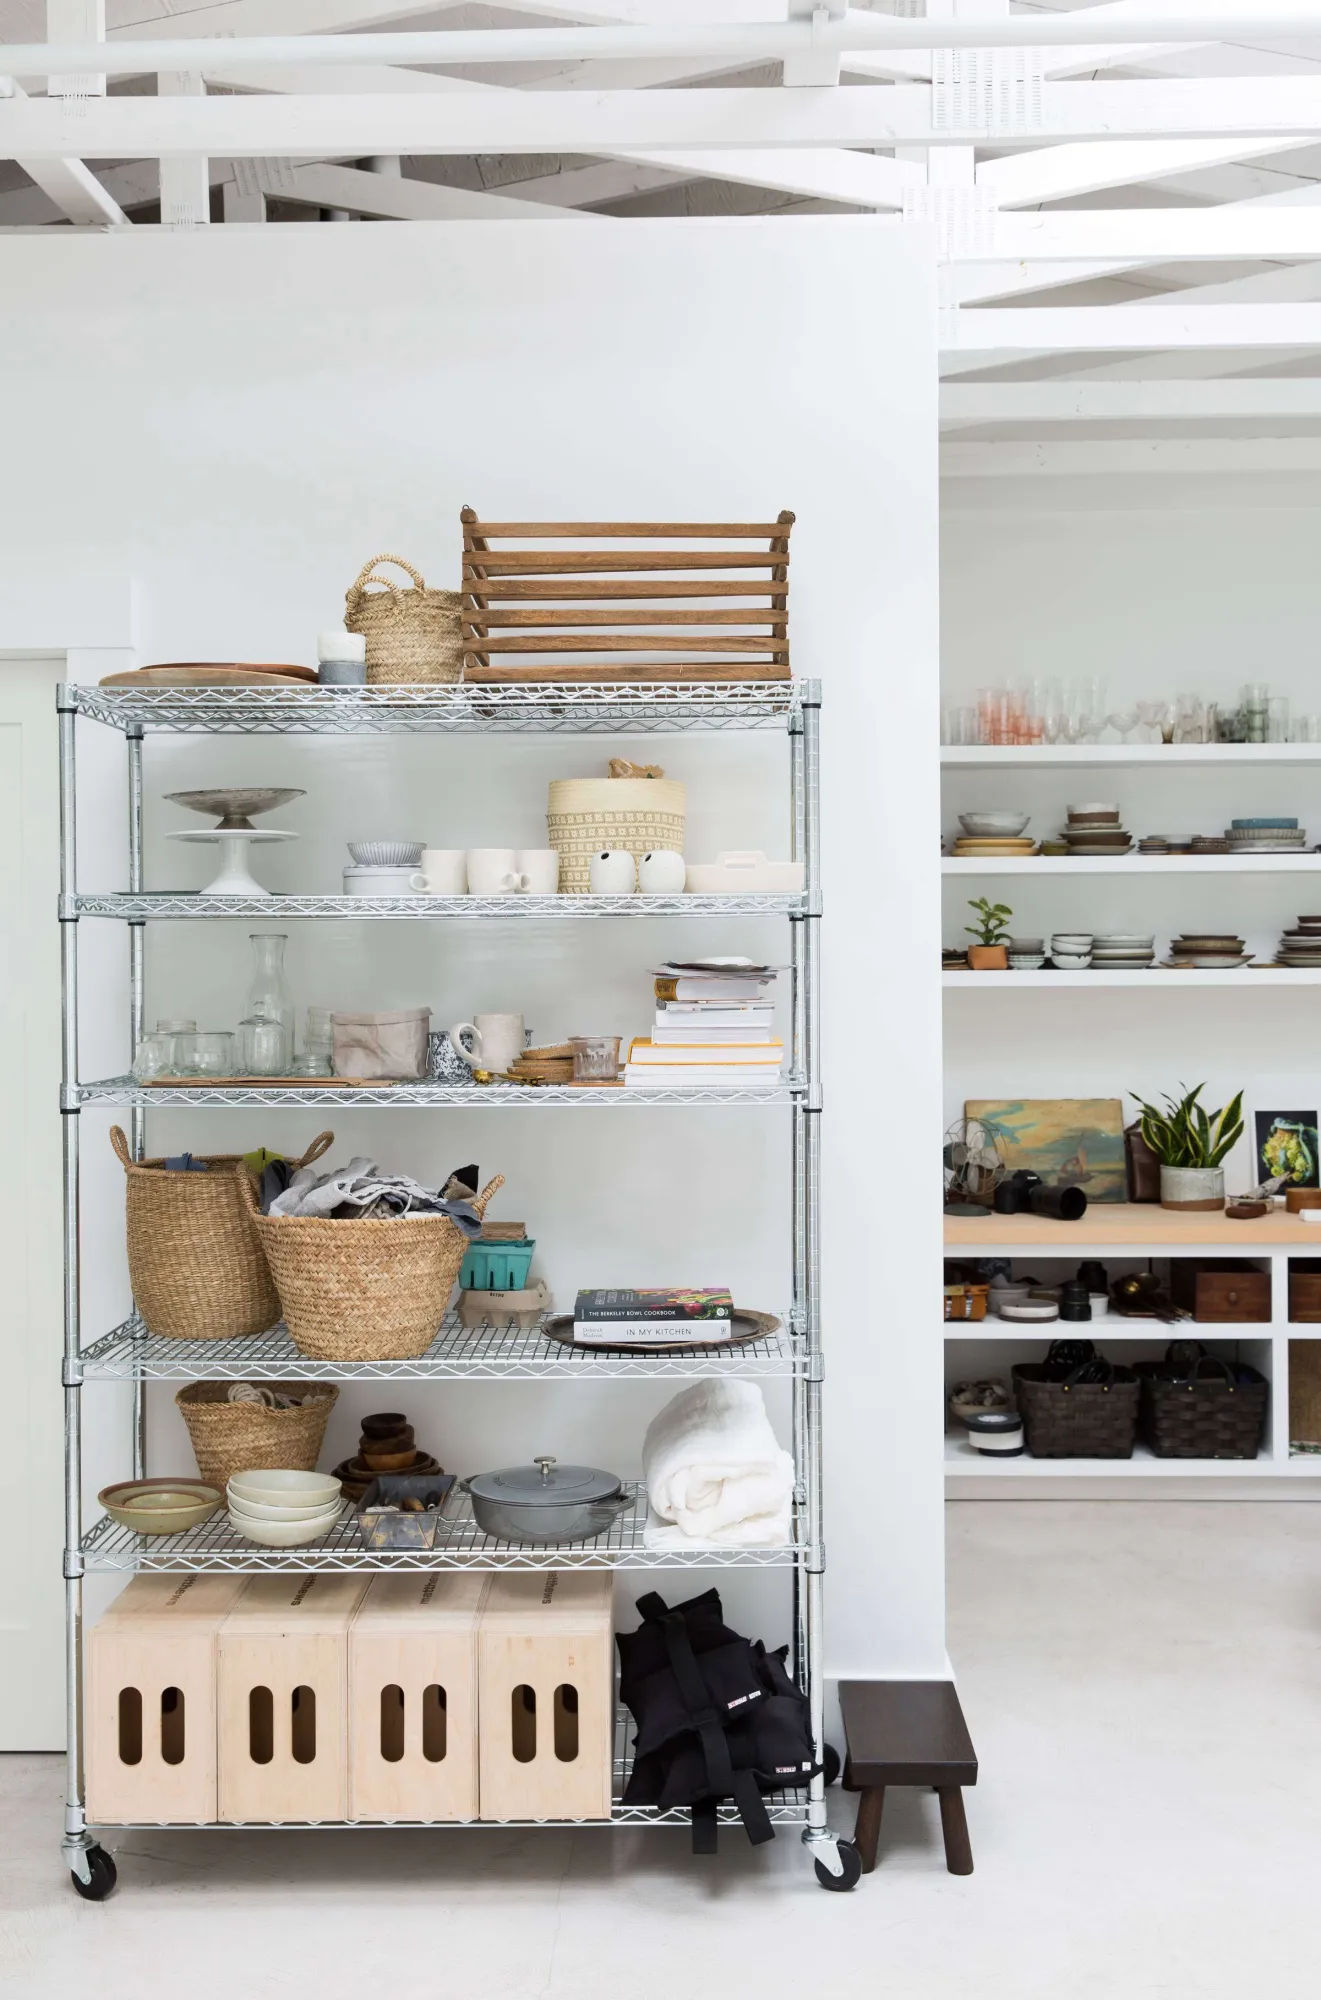 Trending on The Organized Home: Small Space Living - Remodelista